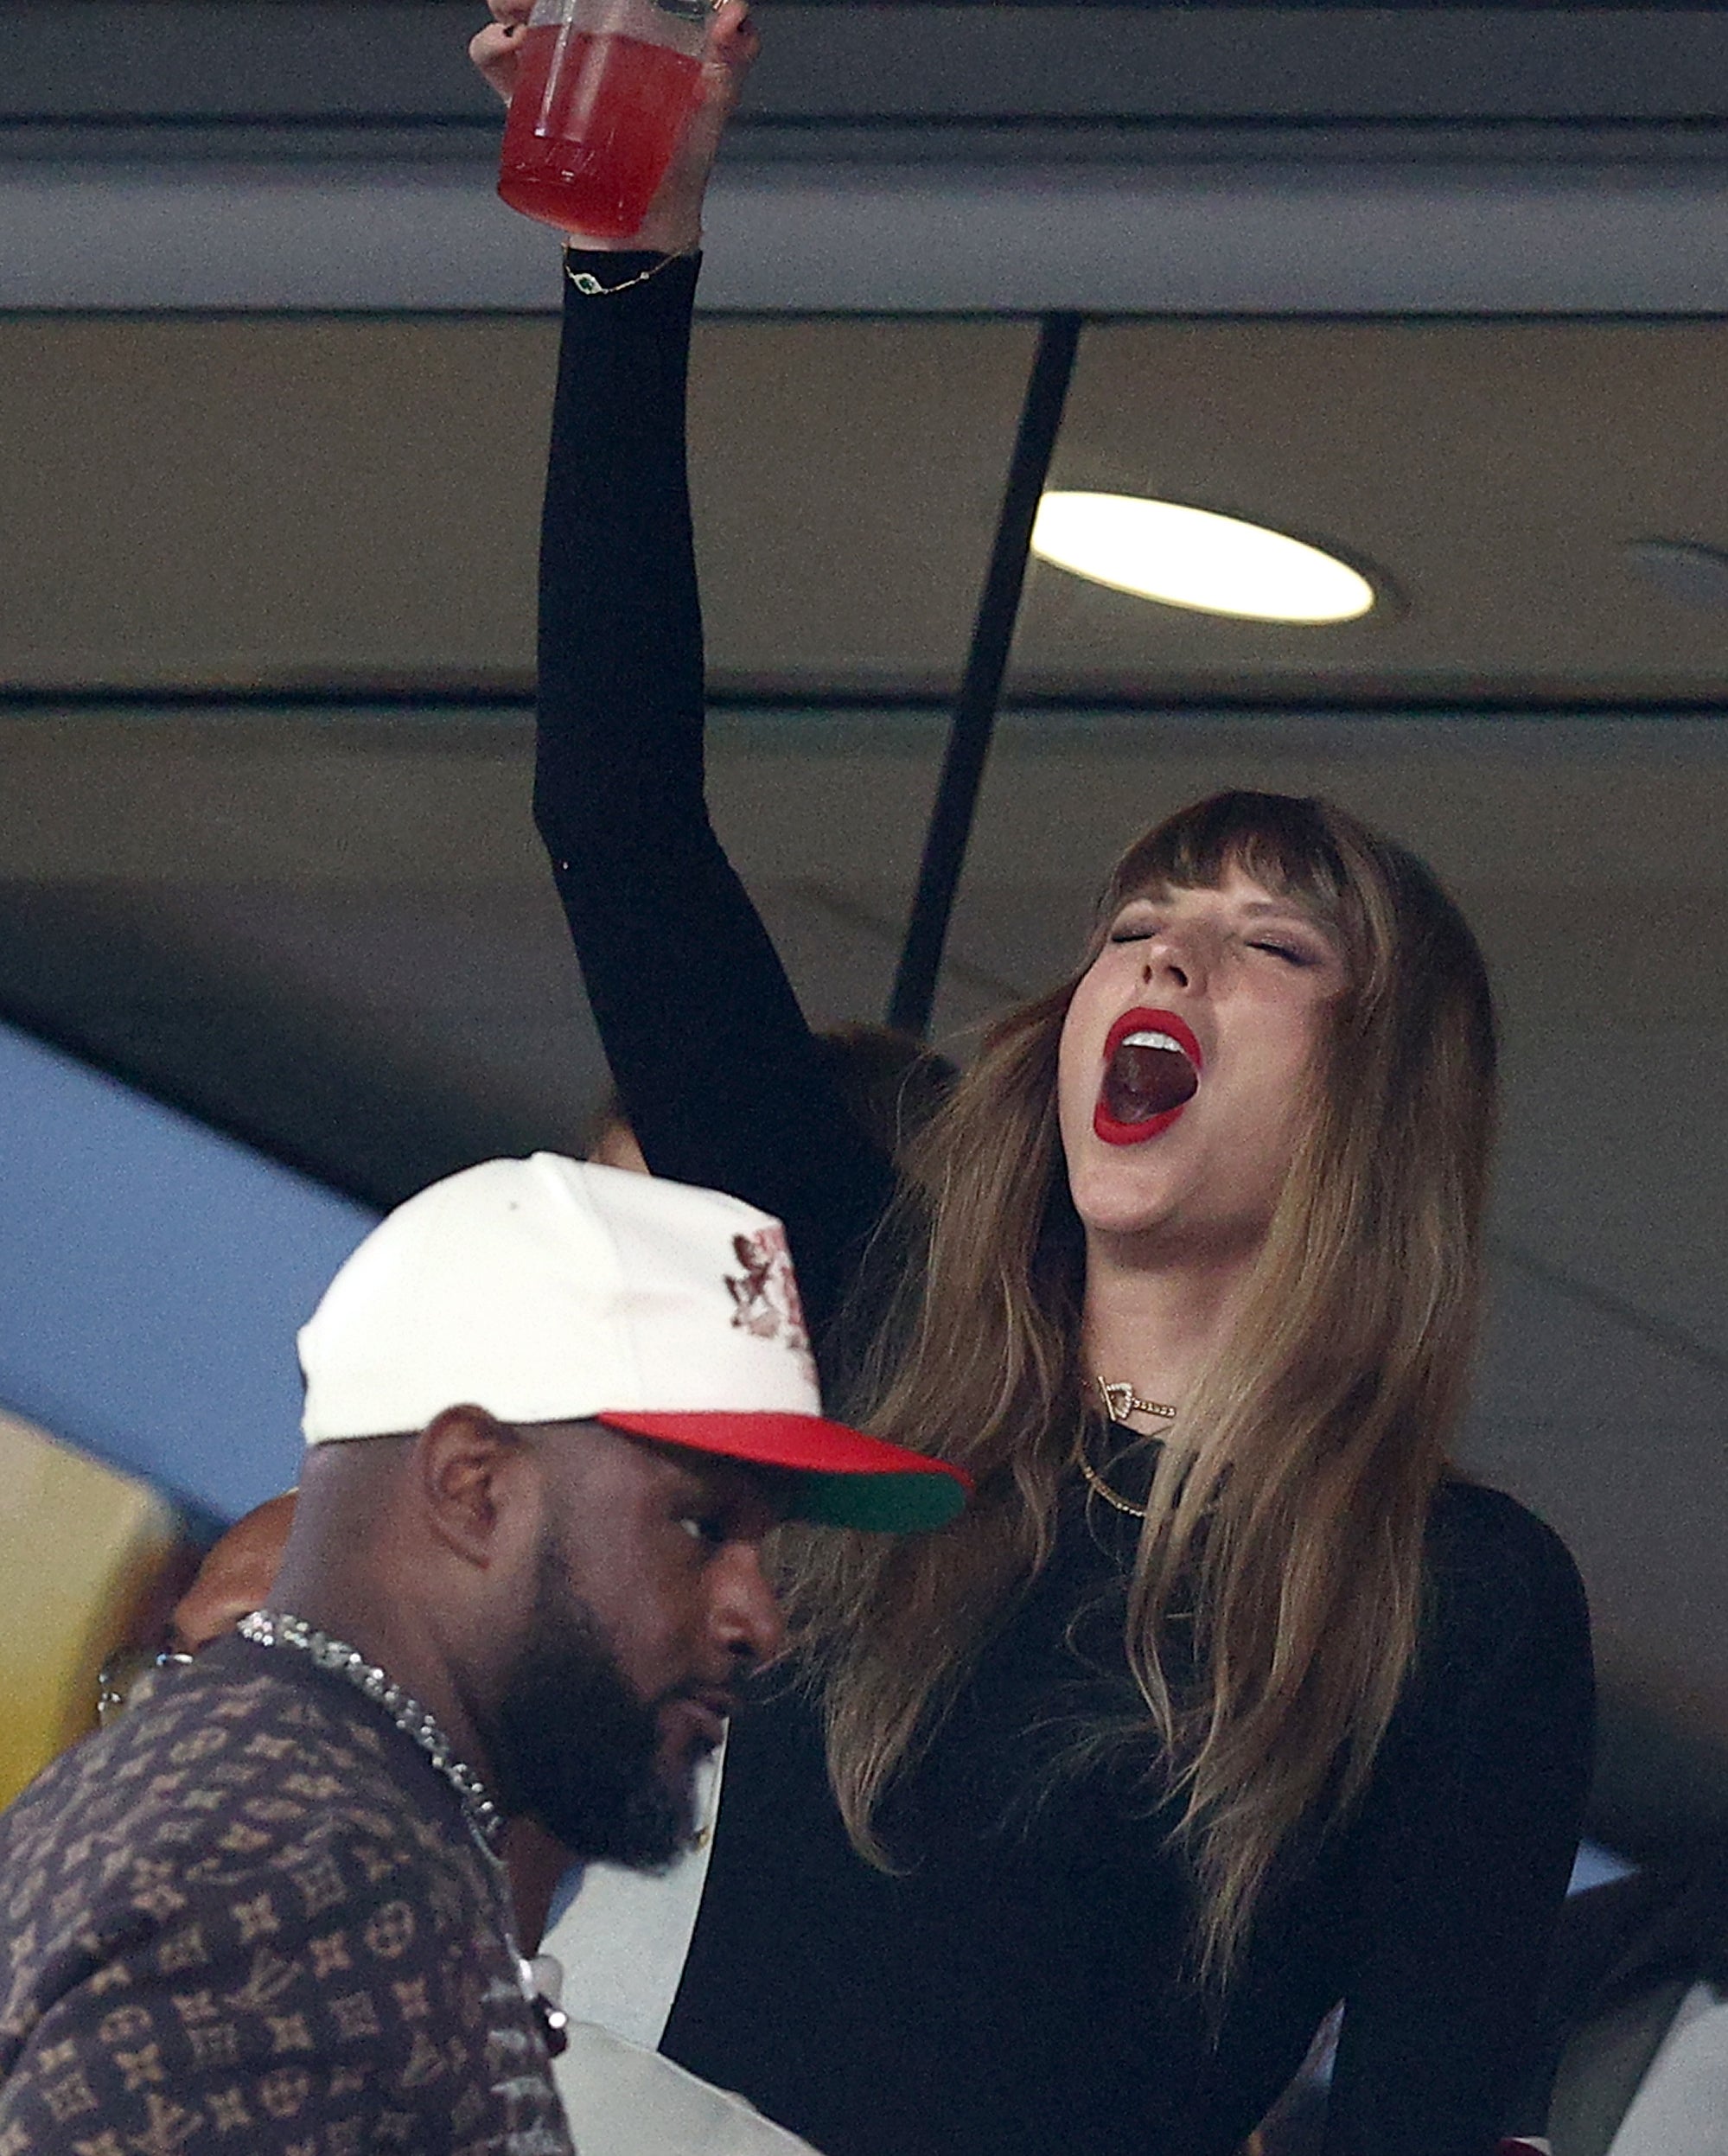 taylor cheering and putting a drink in the air